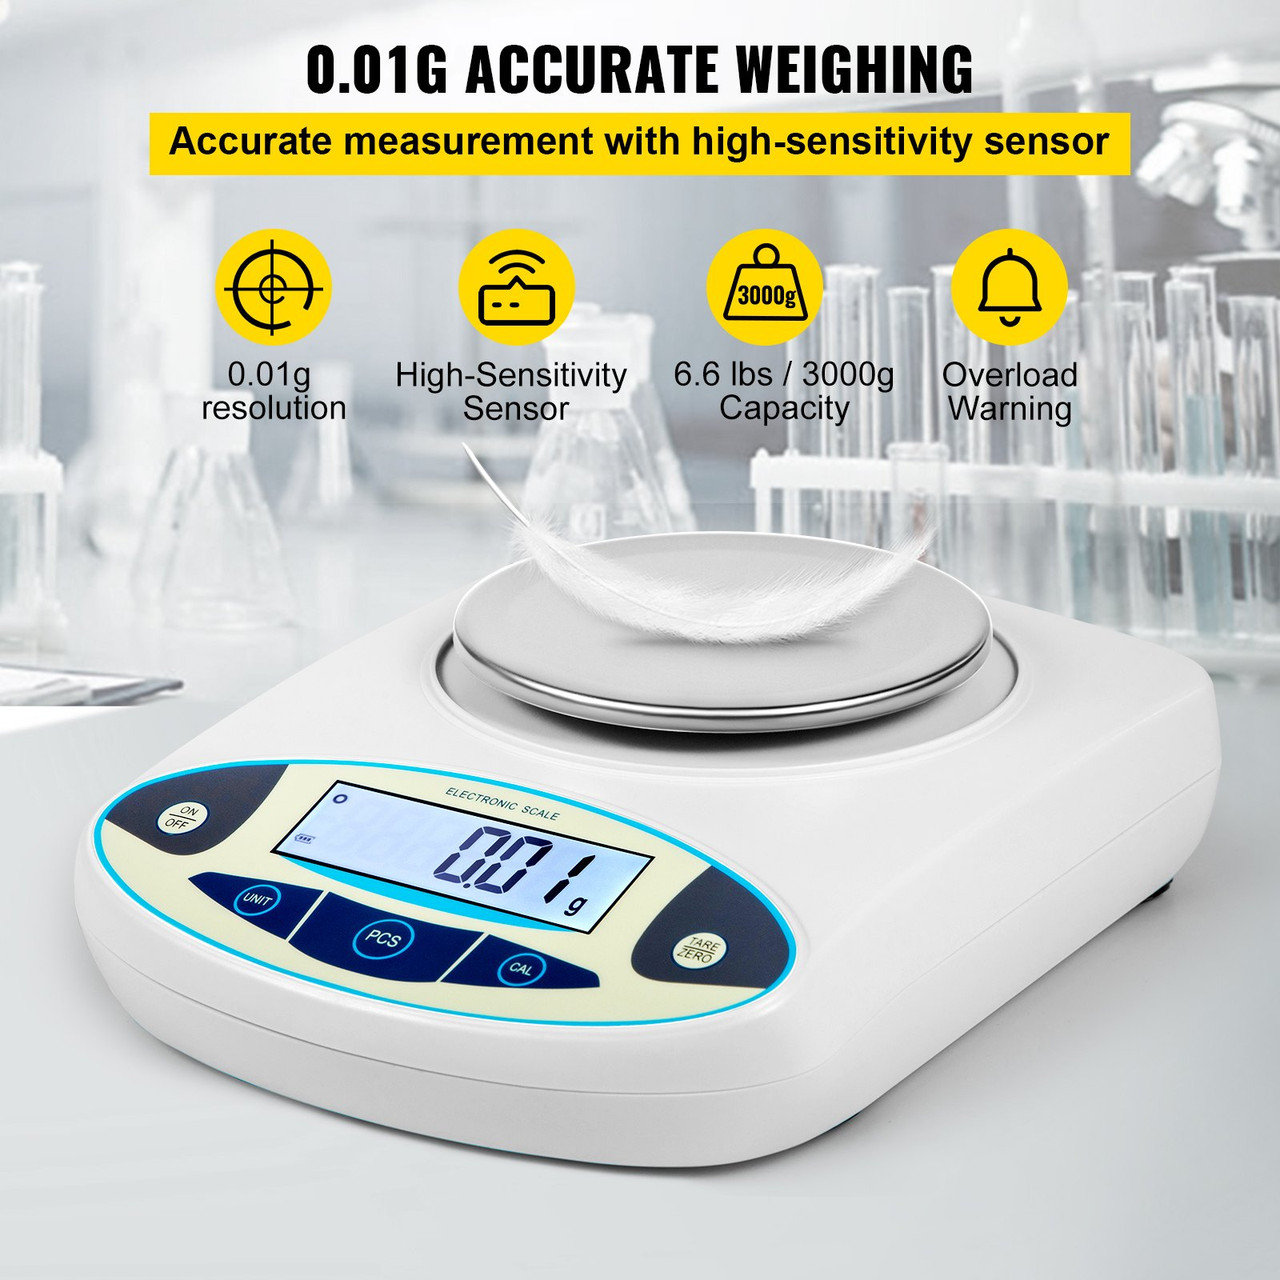 Lab Scale Analytical Balance, 3000g x 0.01g Accuracy High Precision Lab Scale 13 Units Conversion Scientific Digital Laboratory Balance Scale for Lab, Jewelry, Industrial, Business(3000g, 0.01g)